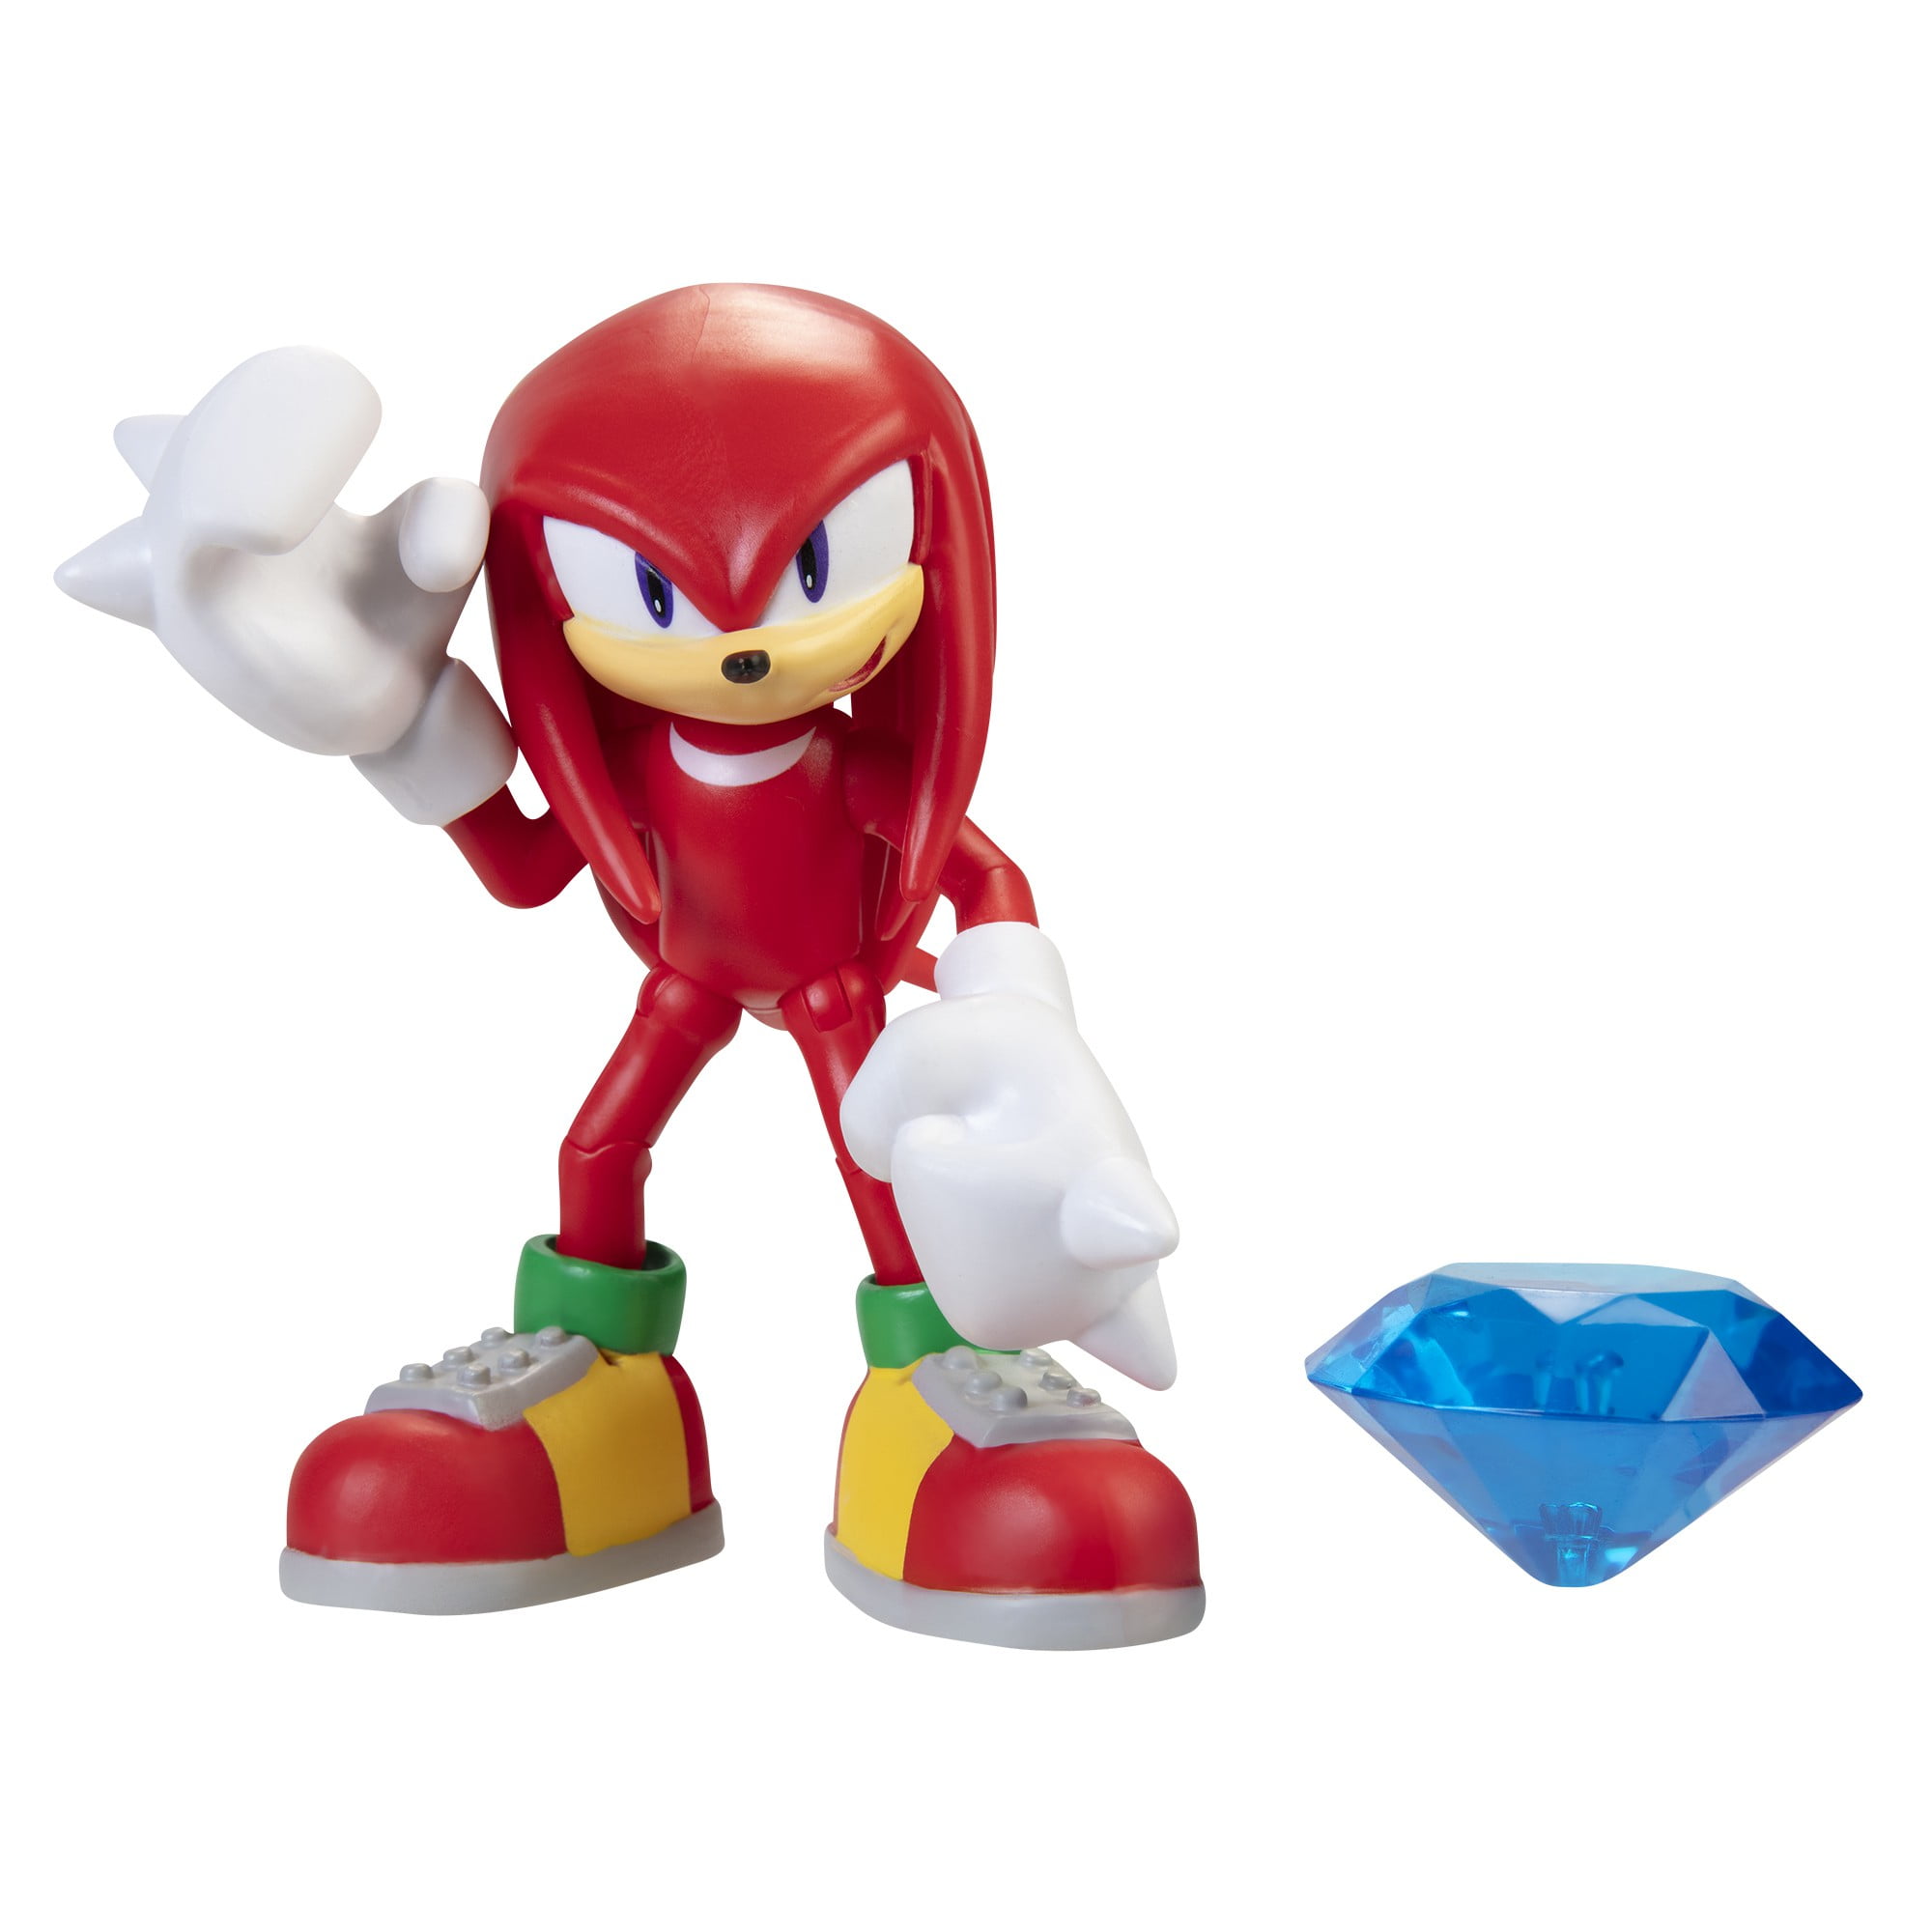 KNUCKLES FROM SONIC THE HEDGEHOG MINIFIGURE **USA SELLER** 